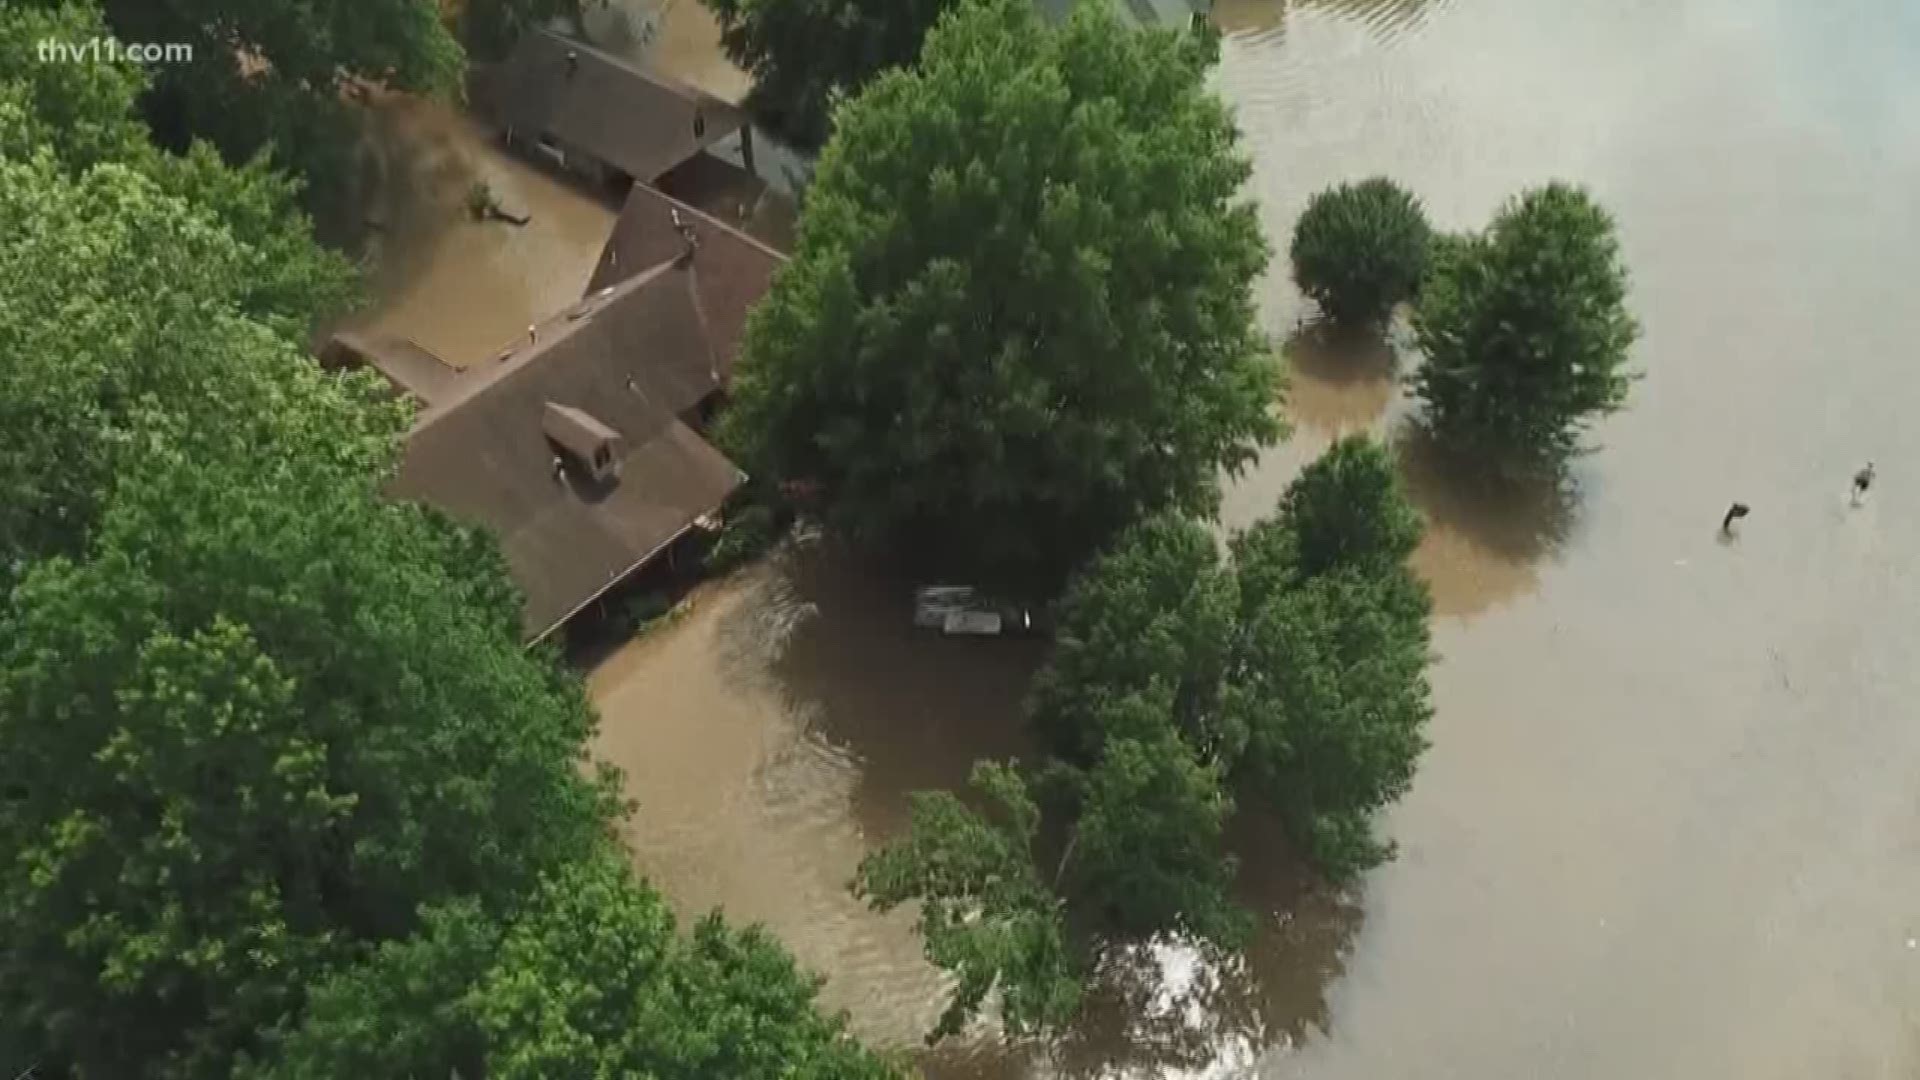 Houses in North Little Rock are underwater tonight as the banks of the Arkansas River spill over into neighborhoods.